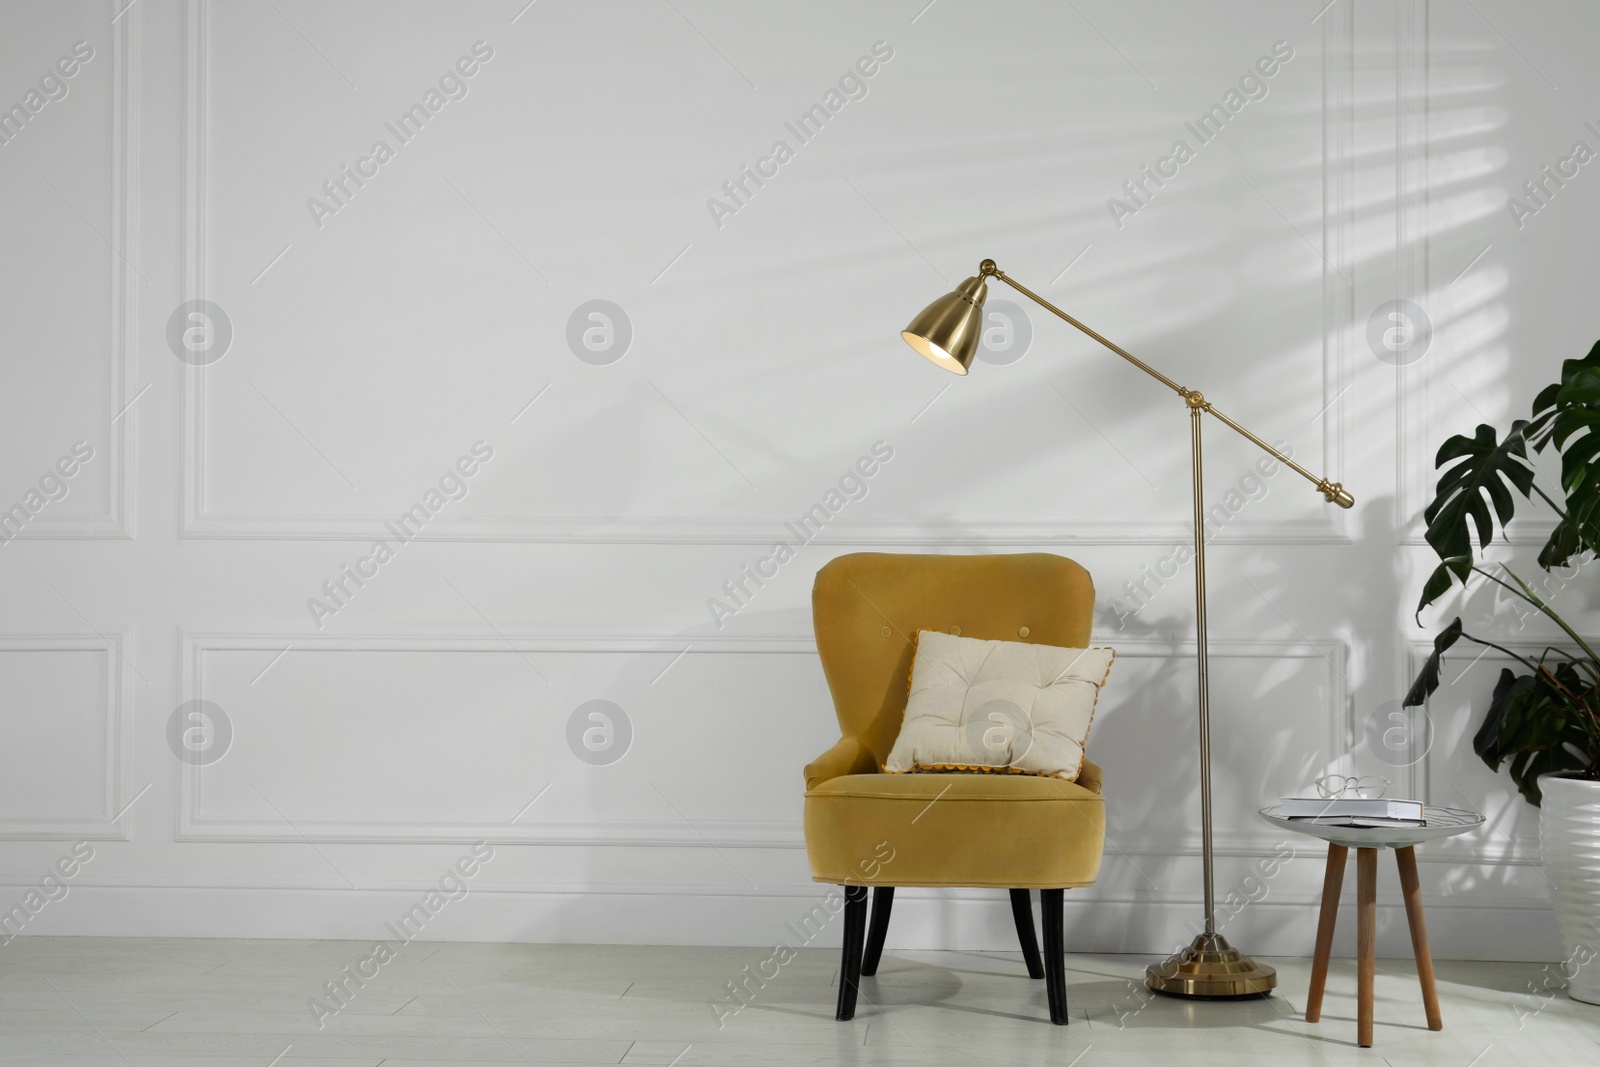 Photo of Comfortable armchair, table, floor lamp and houseplant near white wall in room, space for text. Interior design